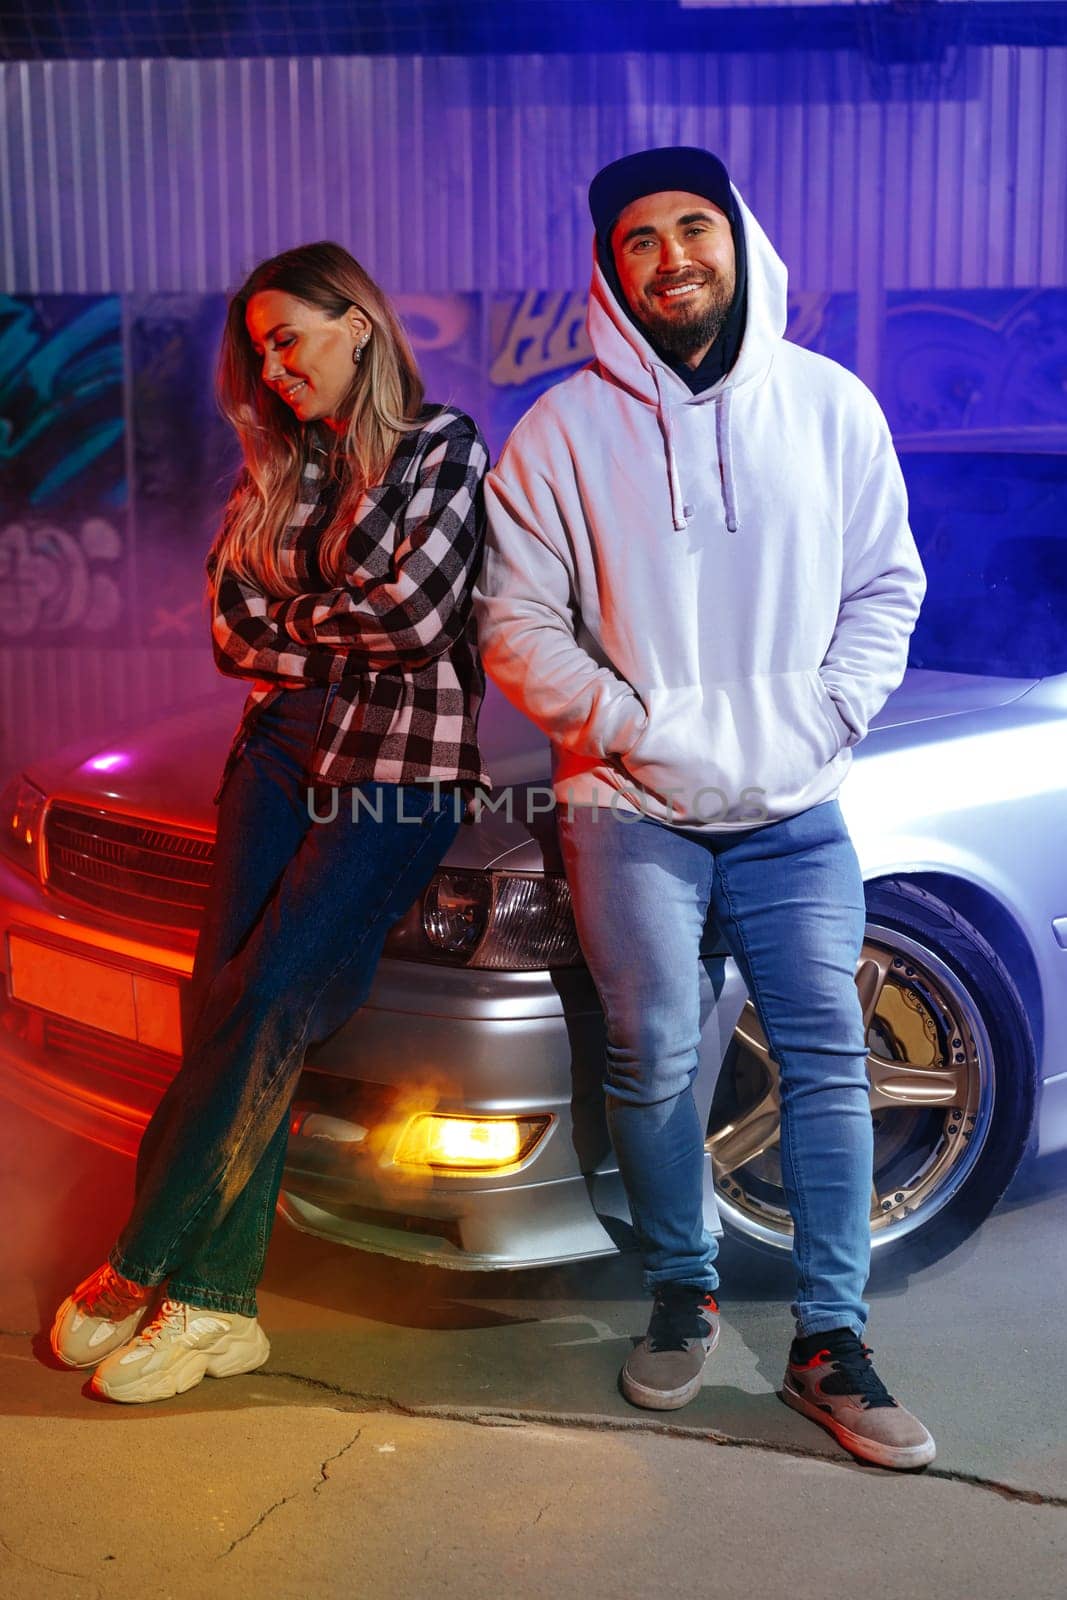 Smiling loving couple standing near sport car over night city background